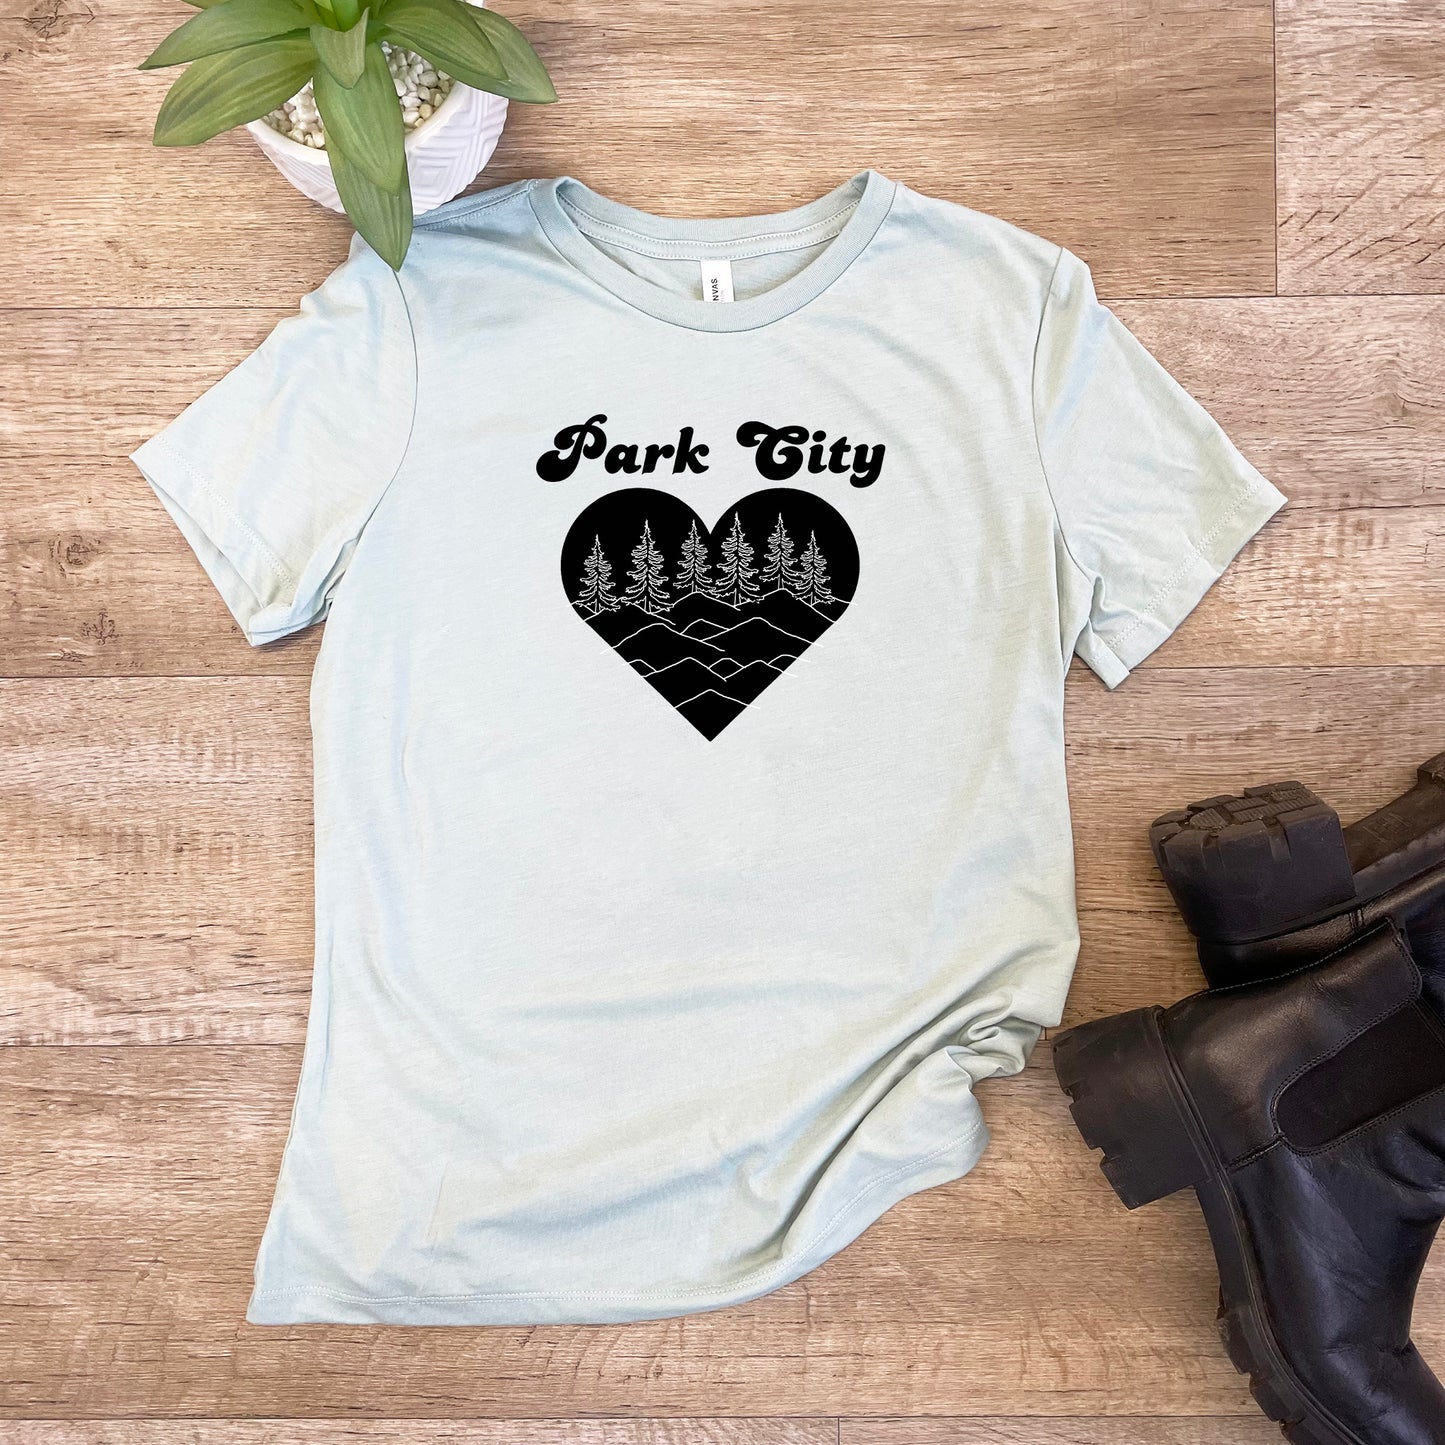 a t - shirt that says park city with trees in the heart